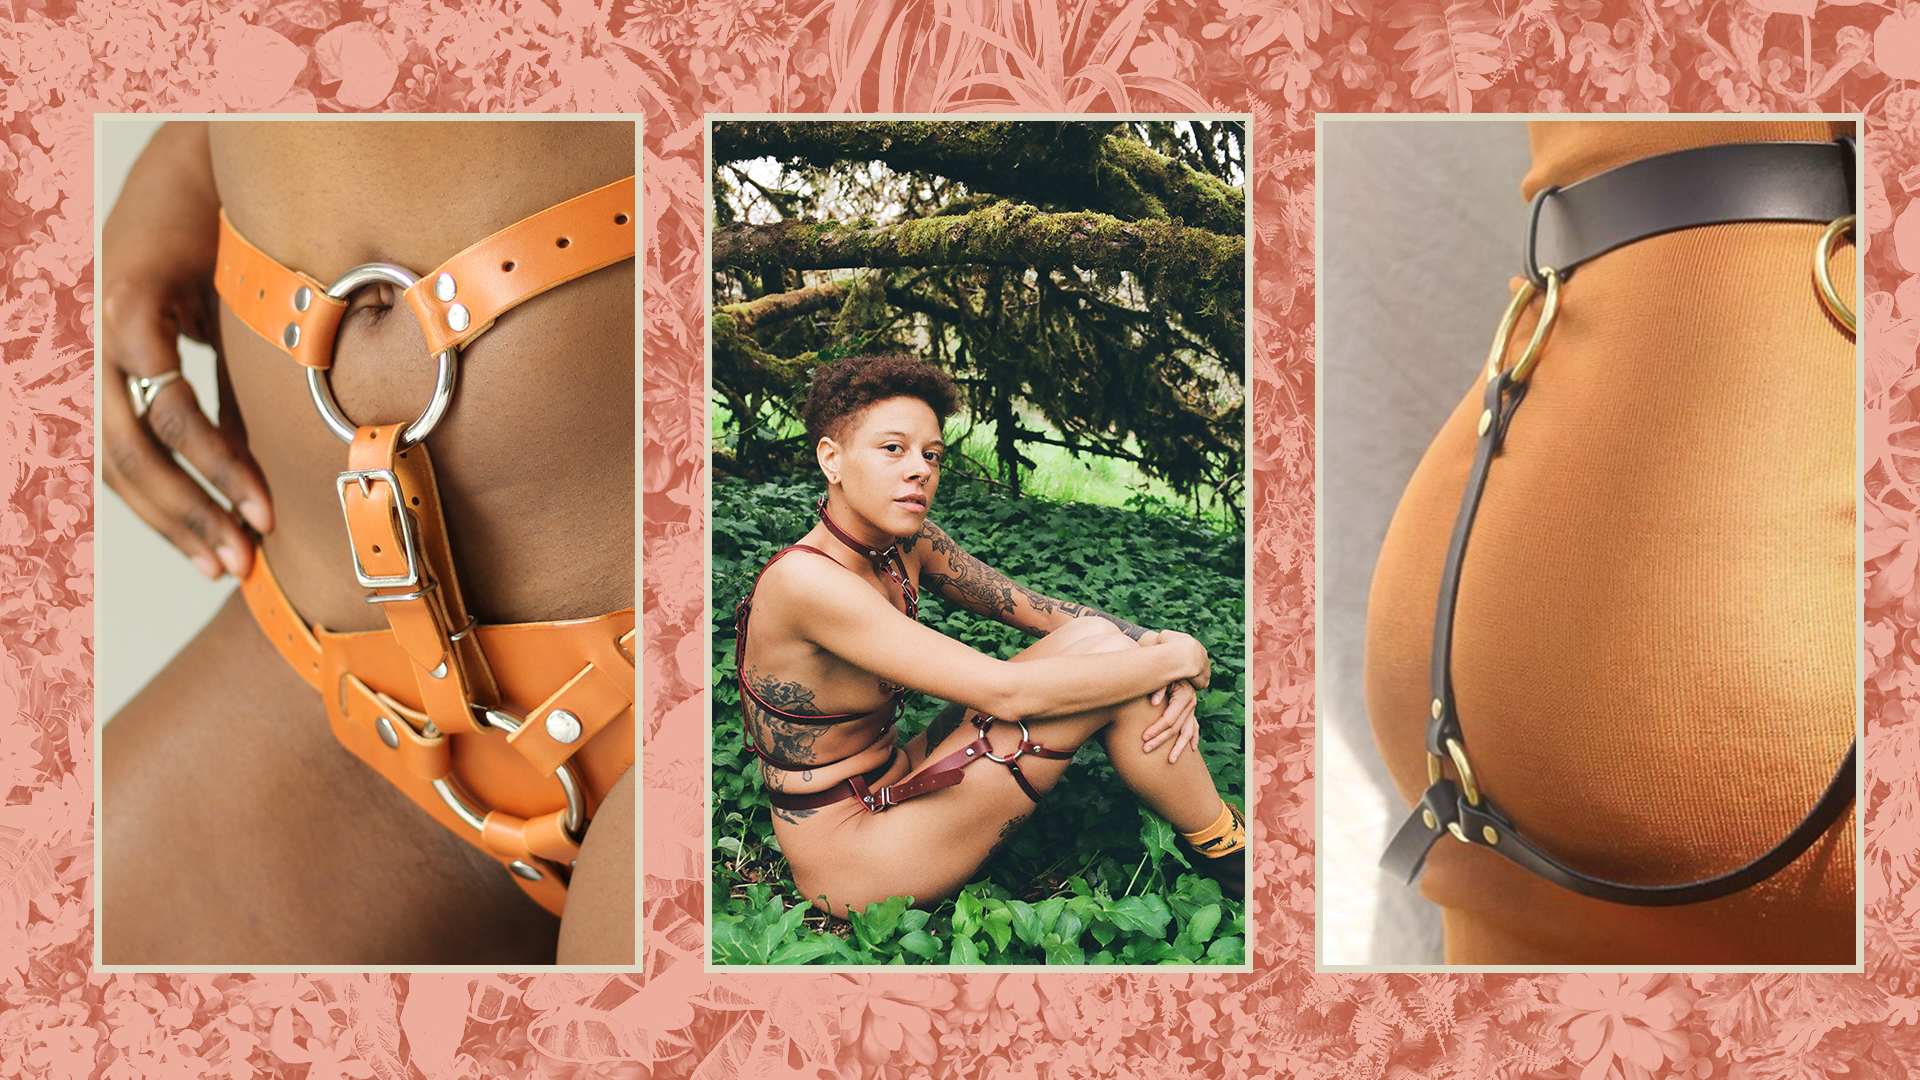 Strap-Ons Are Art for This Femme-Friendly DIY Leather Company photo photo pic